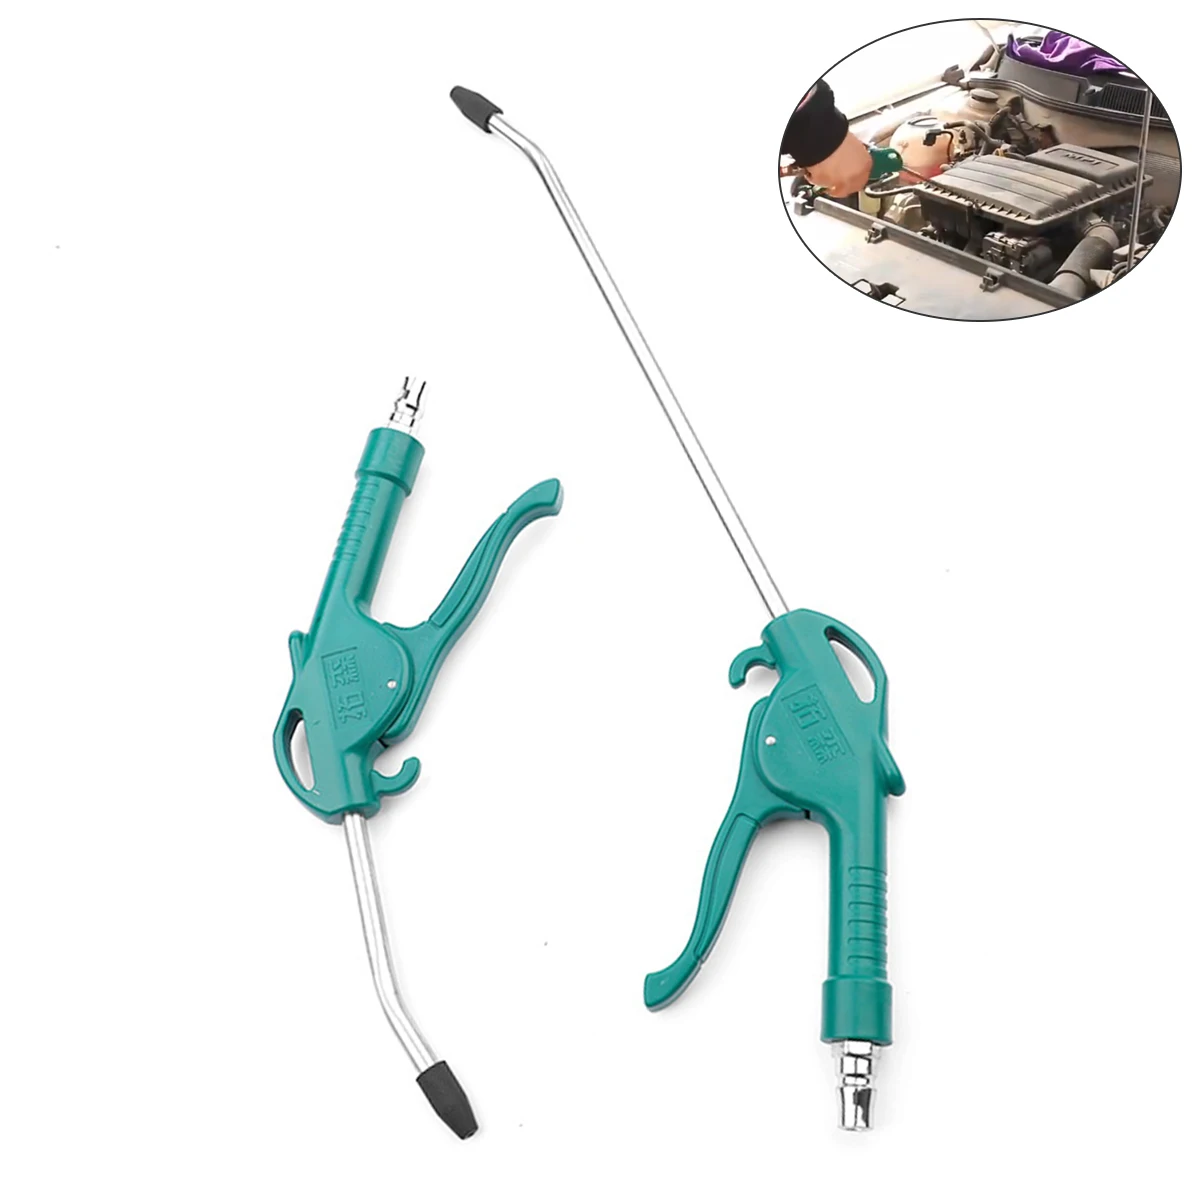 High-pressure Air Blow Gun Pistol Trigger Cleaner Compressor Dust Blower Nozzle Pneumatic Cleaning Tool for Other Machines